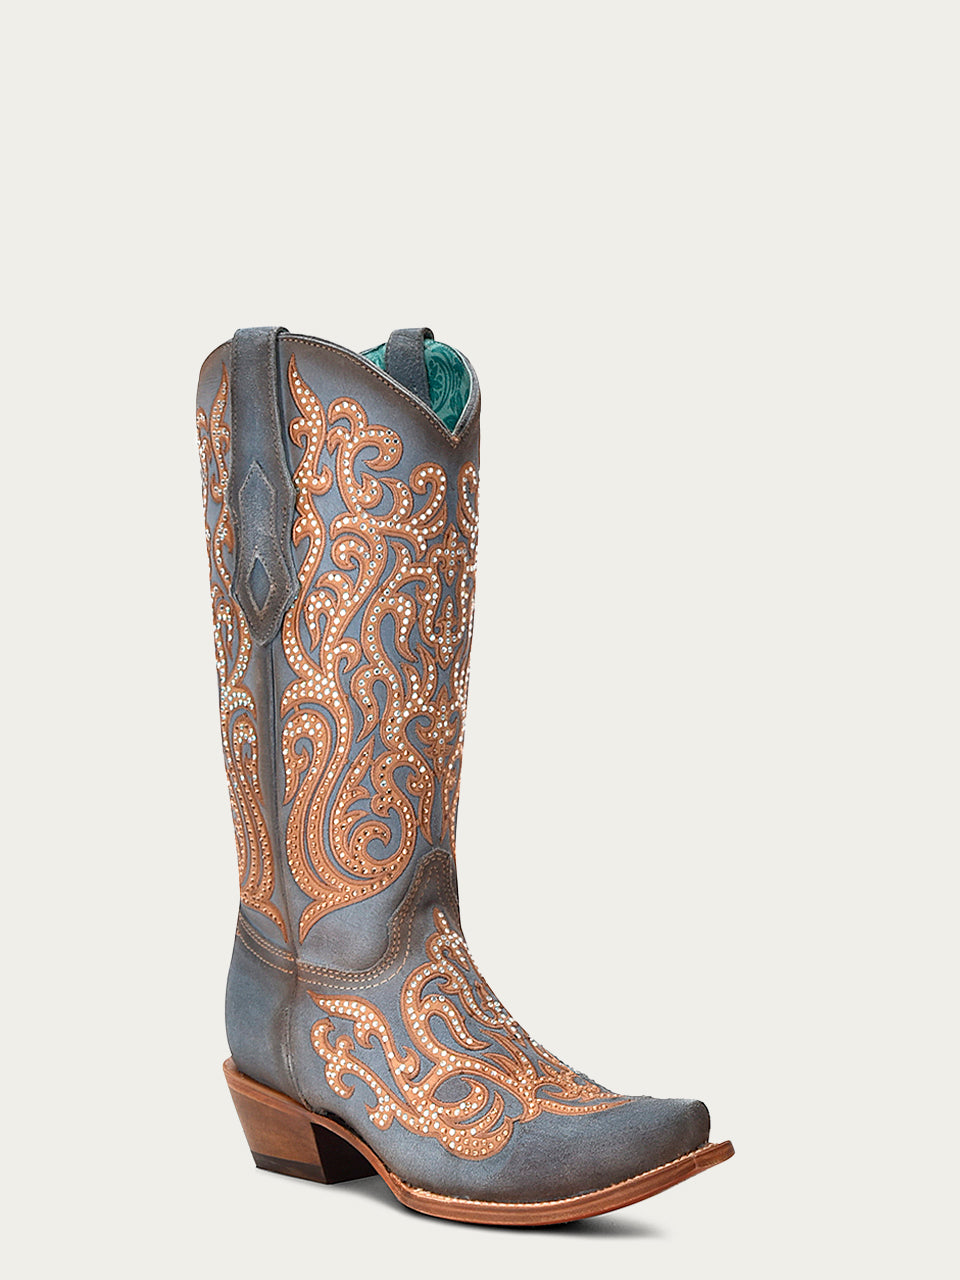 C4124 - WOMEN'S HONEY OVERLAY WITH CRYSTALS BLUE SNIP TOE COWBOY BOOT